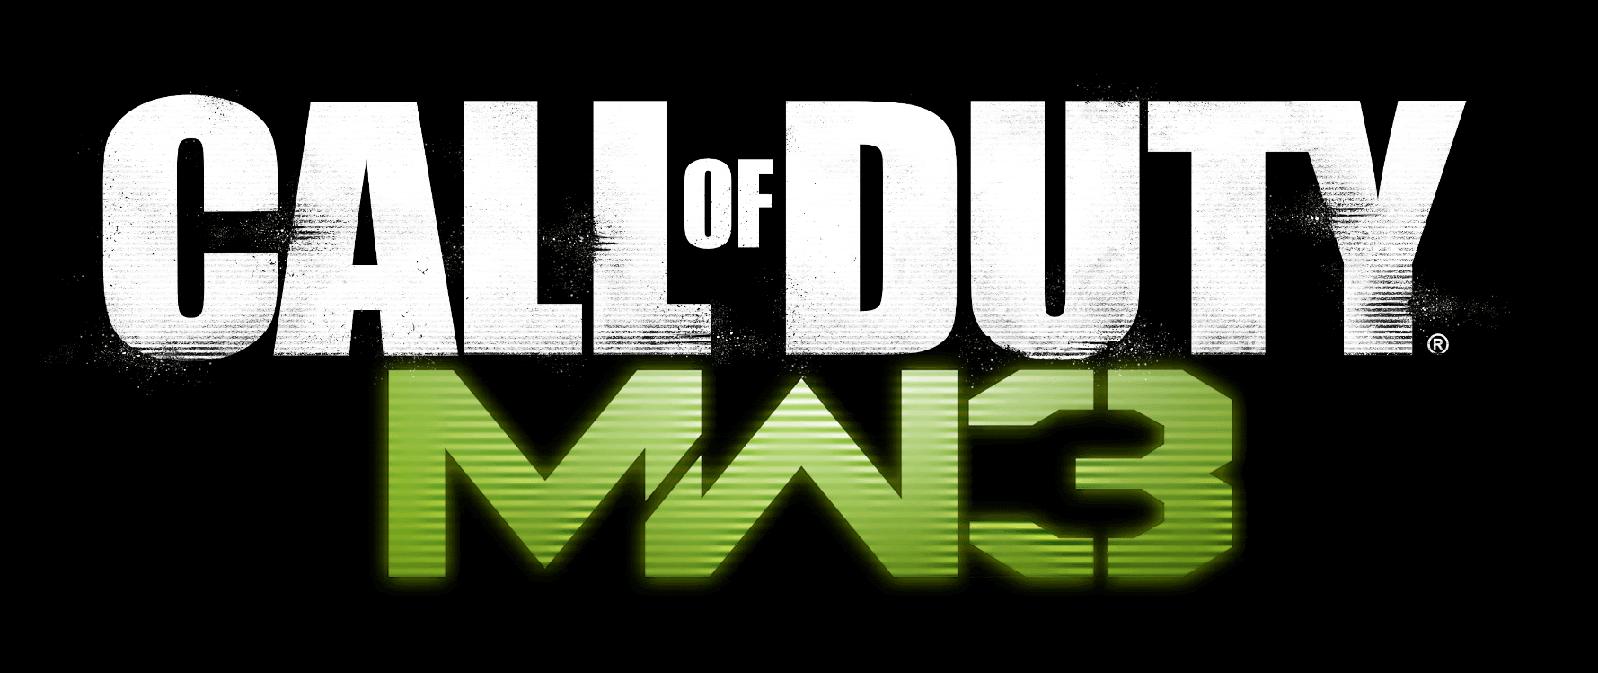 Modern Warfare 3 Install Size for Xbox 360 Confirmed